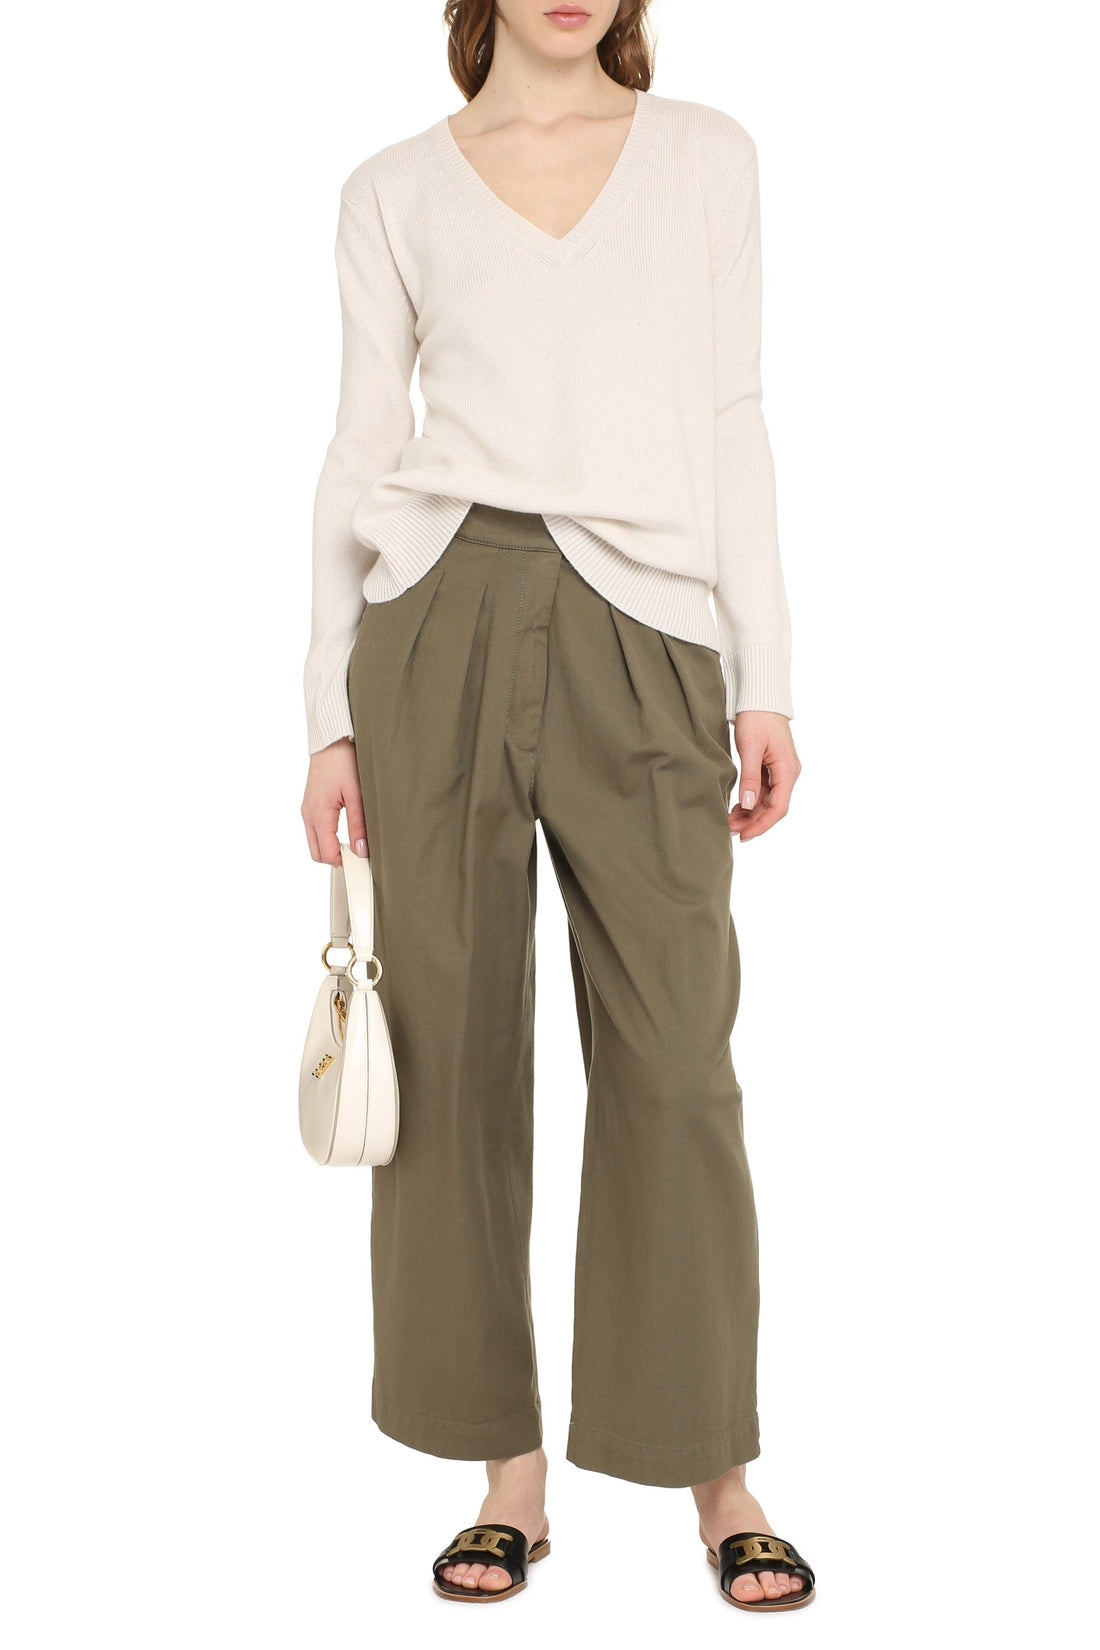 S MAX MARA-OUTLET-SALE-Verona wool and cashmere pullover-ARCHIVIST